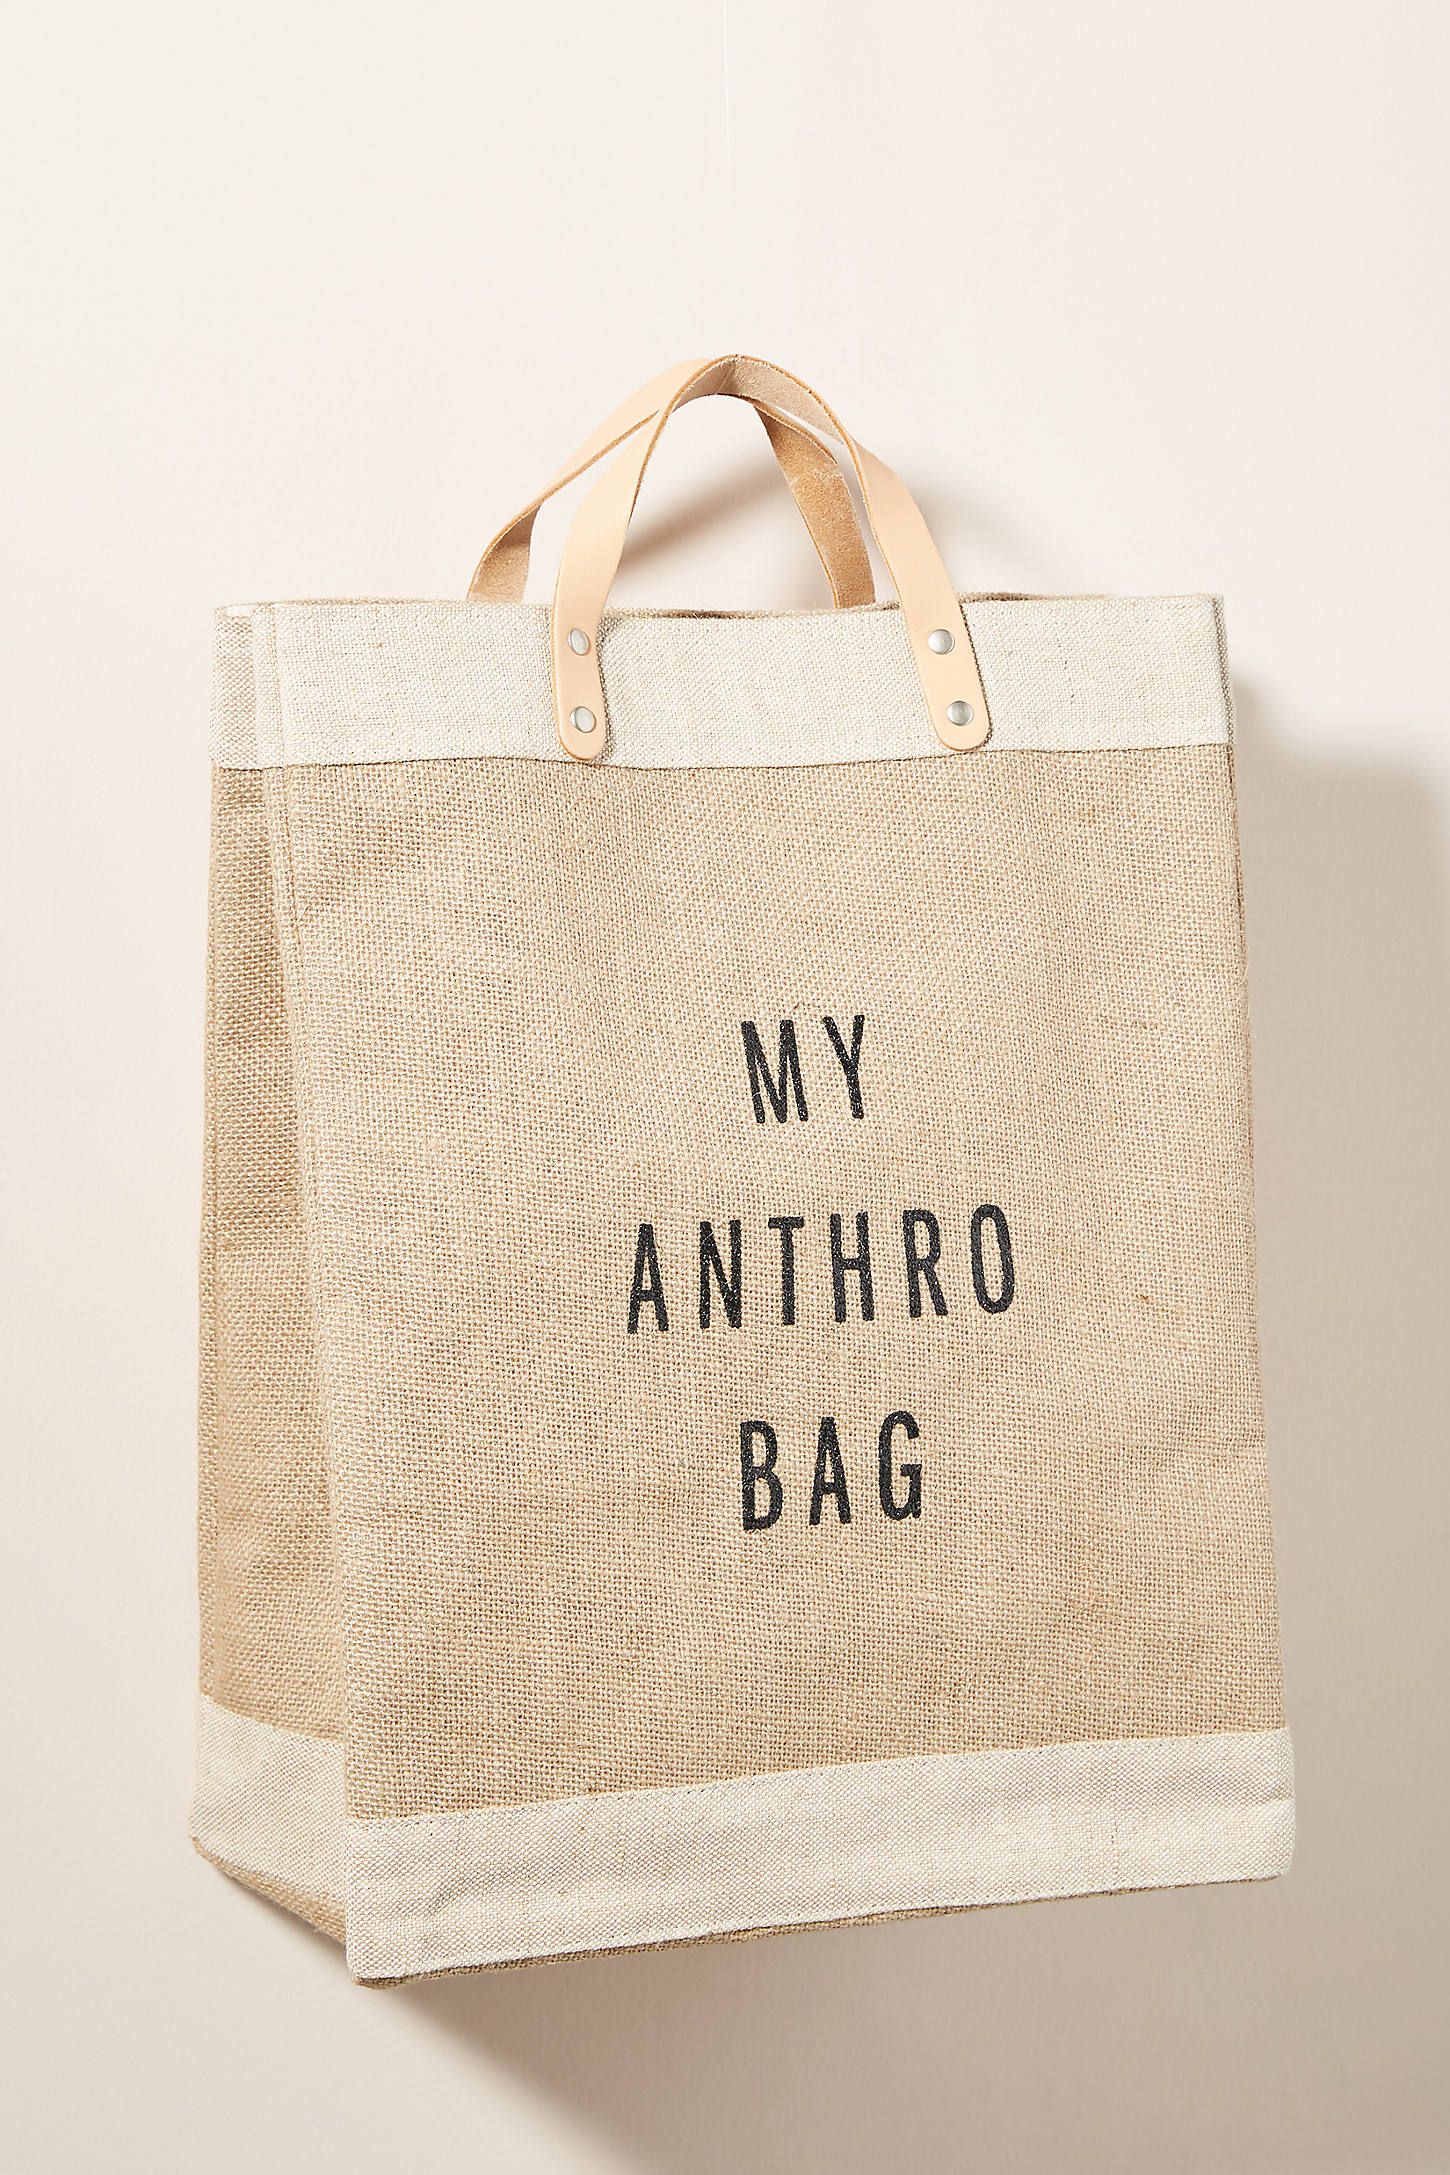 My Anthro Tote Bag | Anthropologie (US)